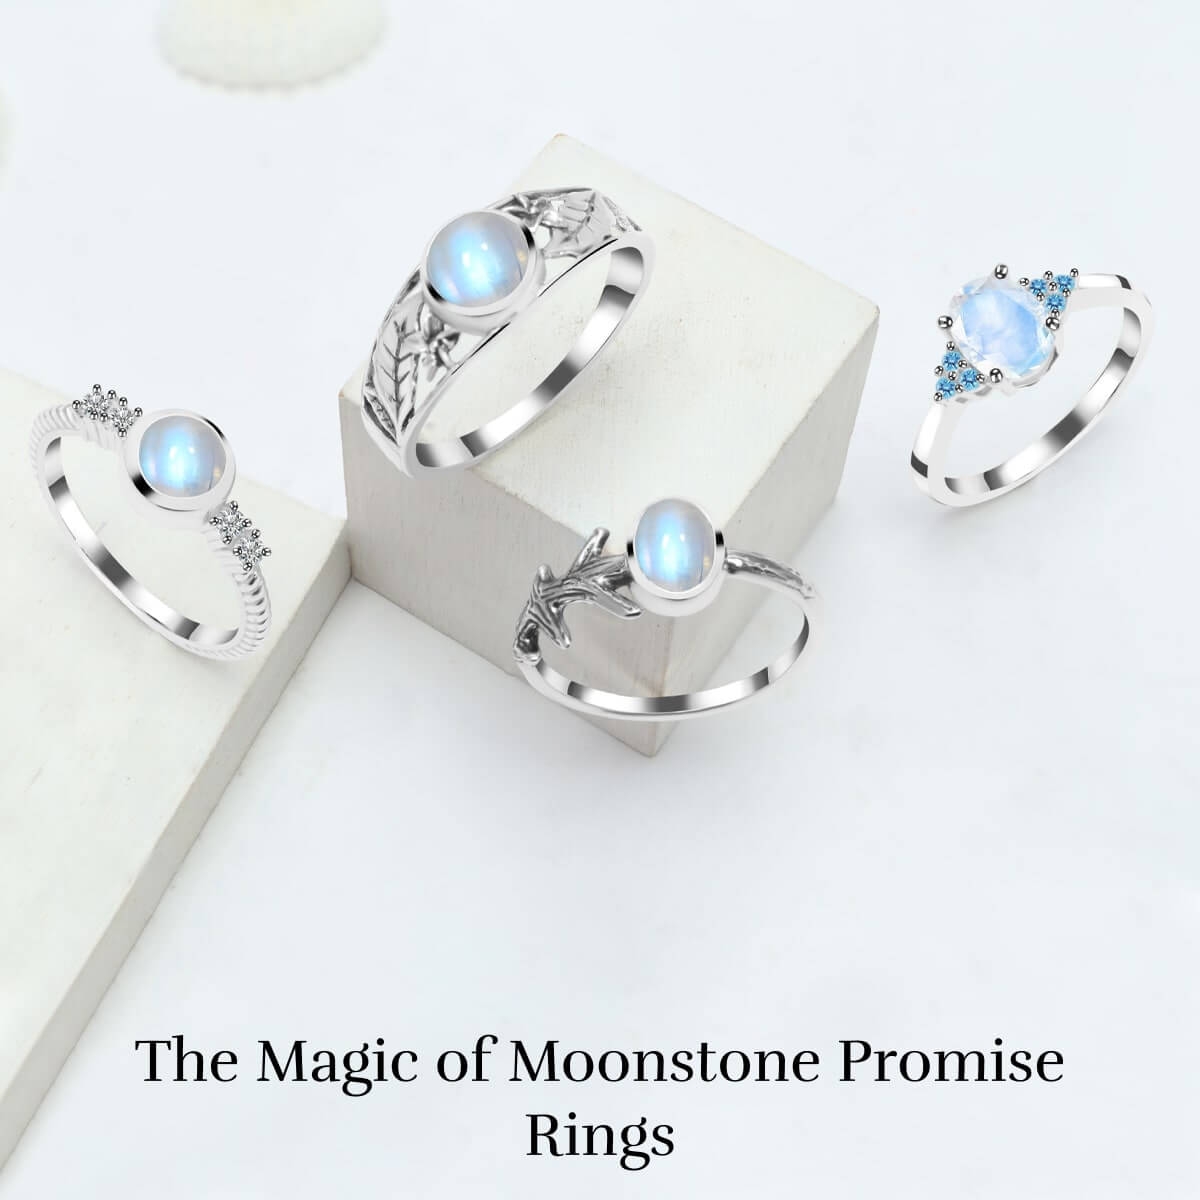 Is Moonstone a Good Option for Promise Rings?